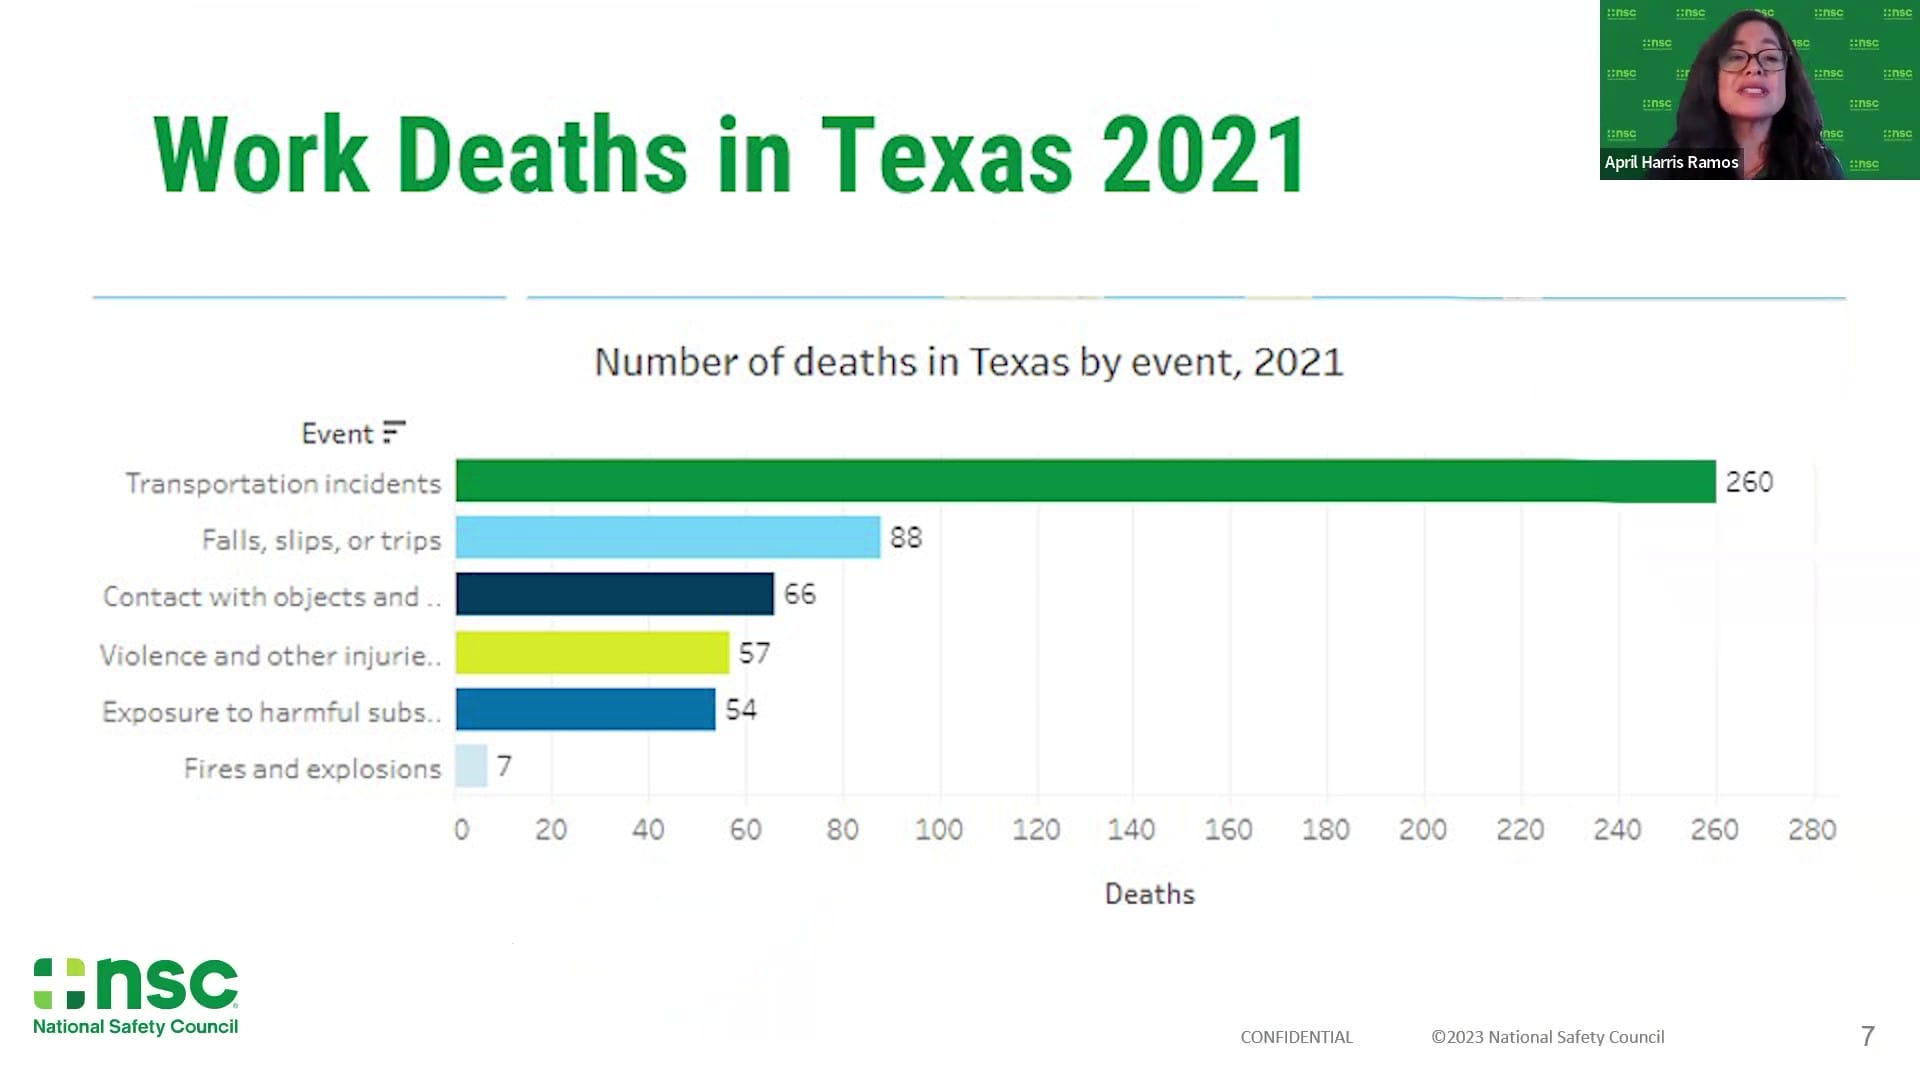 National Safety Council Presentation Safety Culture Work Death in Texas 2021